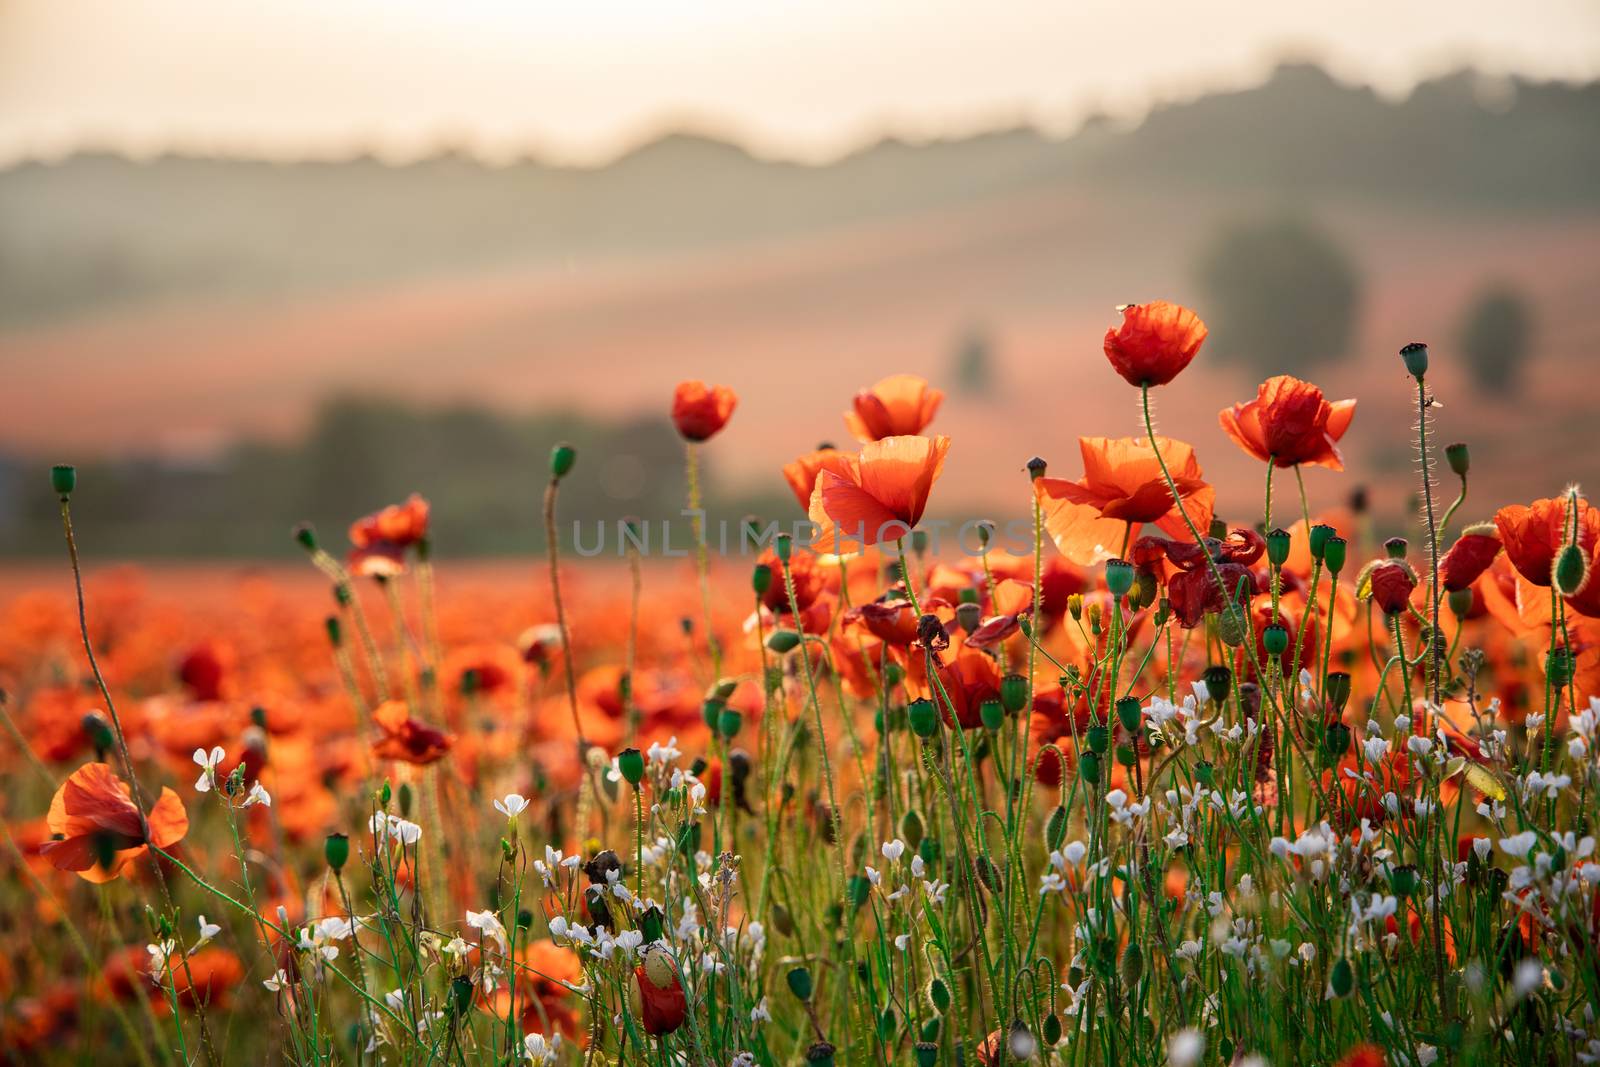 Close Up View of Poppy Flowers at Dawn by kstphotography